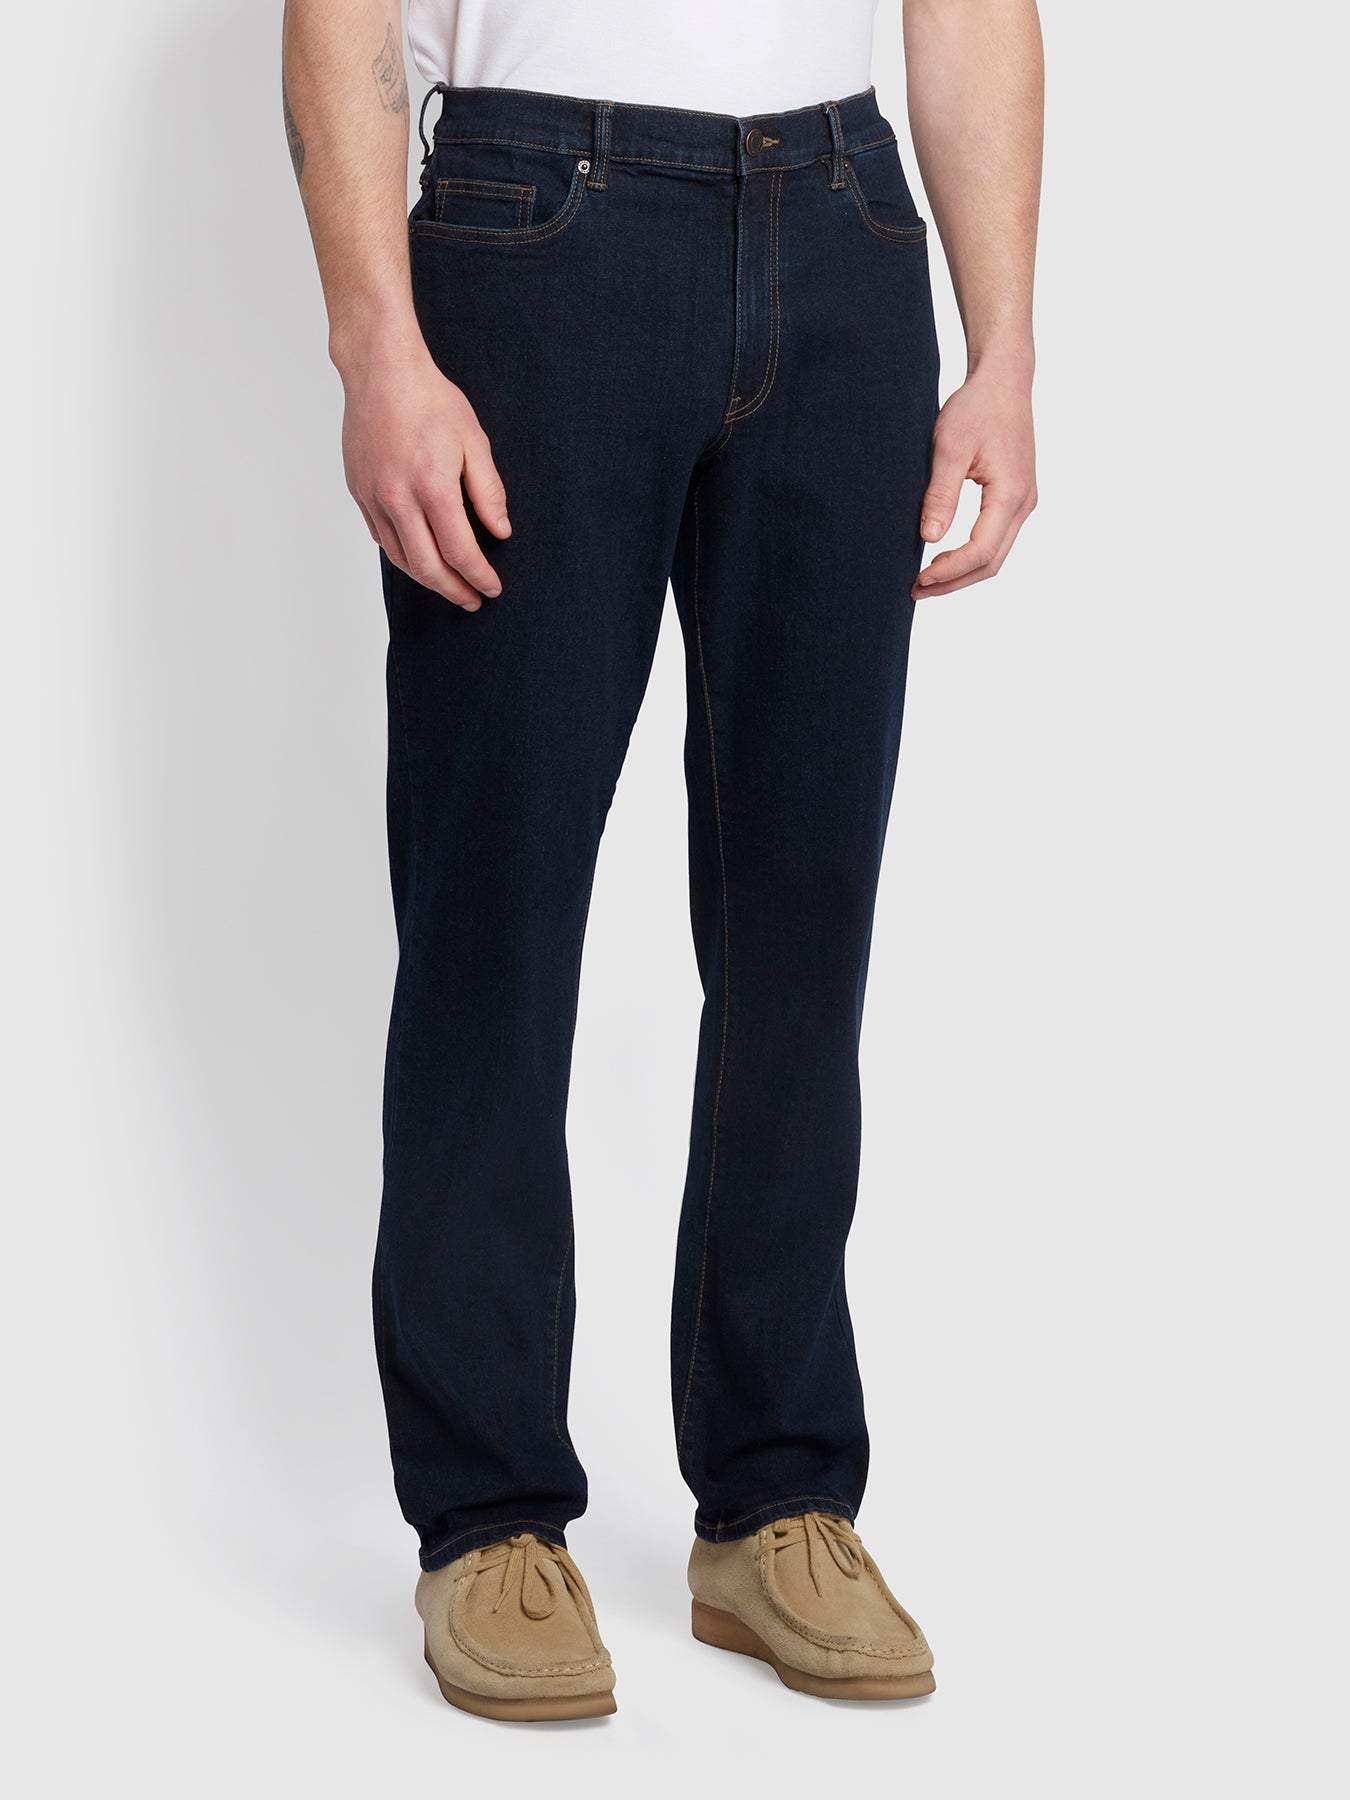 View Lawson Regular Fit Stretch Jeans In Rd Rinse Denim information